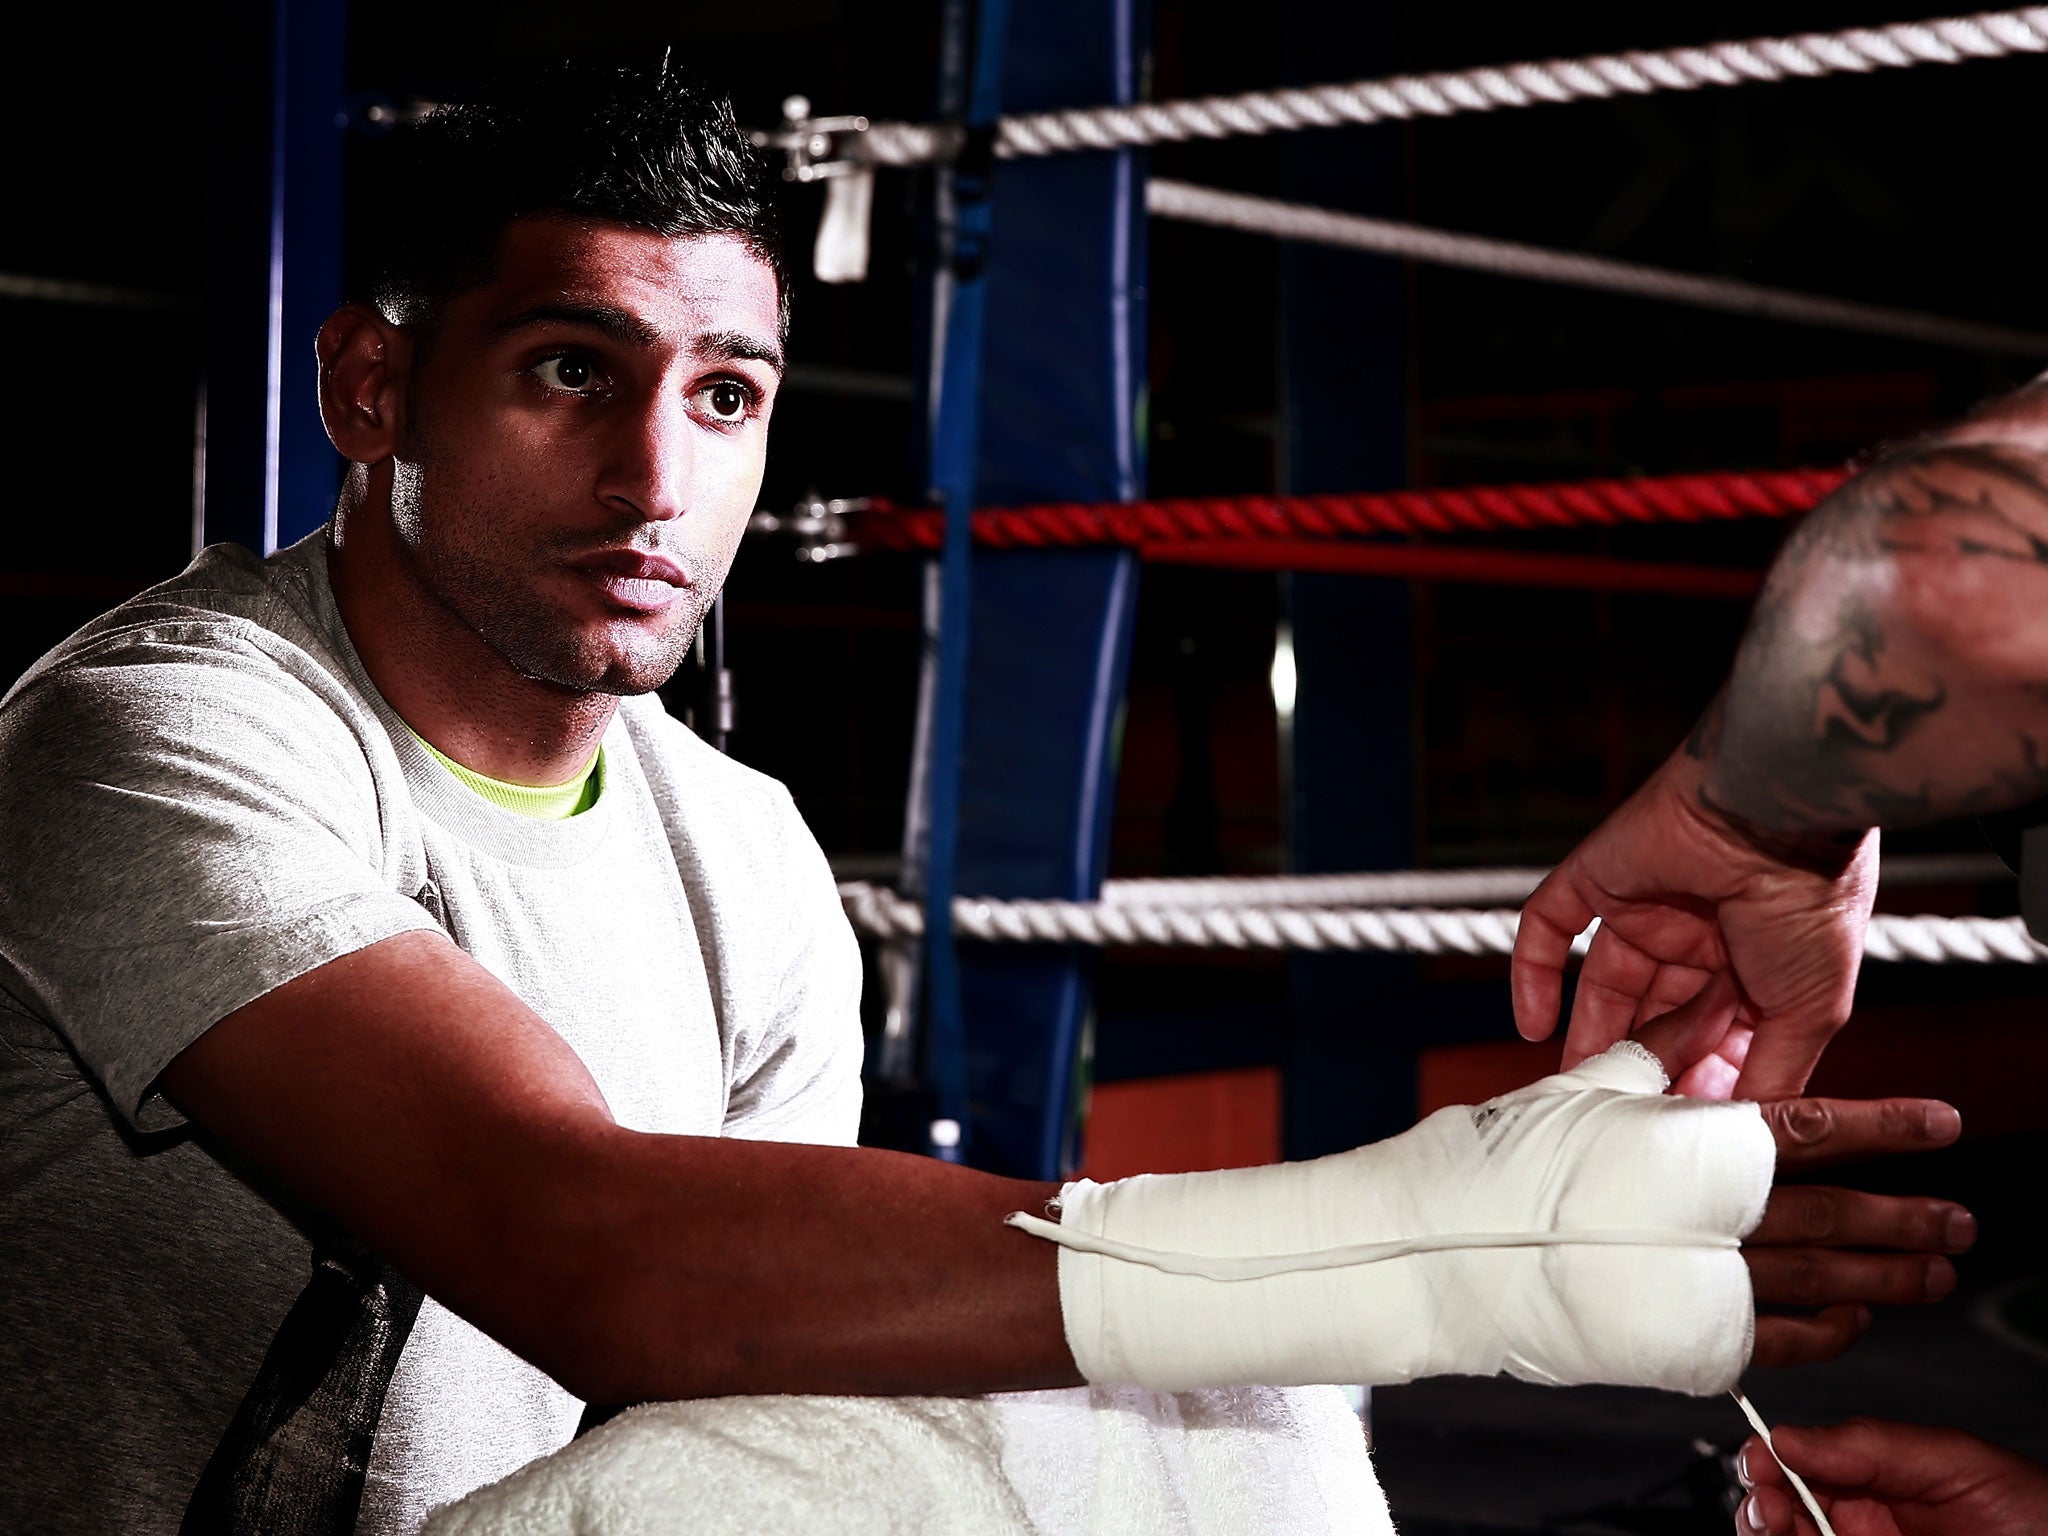 No Khan do: Amir Khan is adamant, stating ‘Boxers who take drugs put the lives of others at risk. I am a clean athlete’